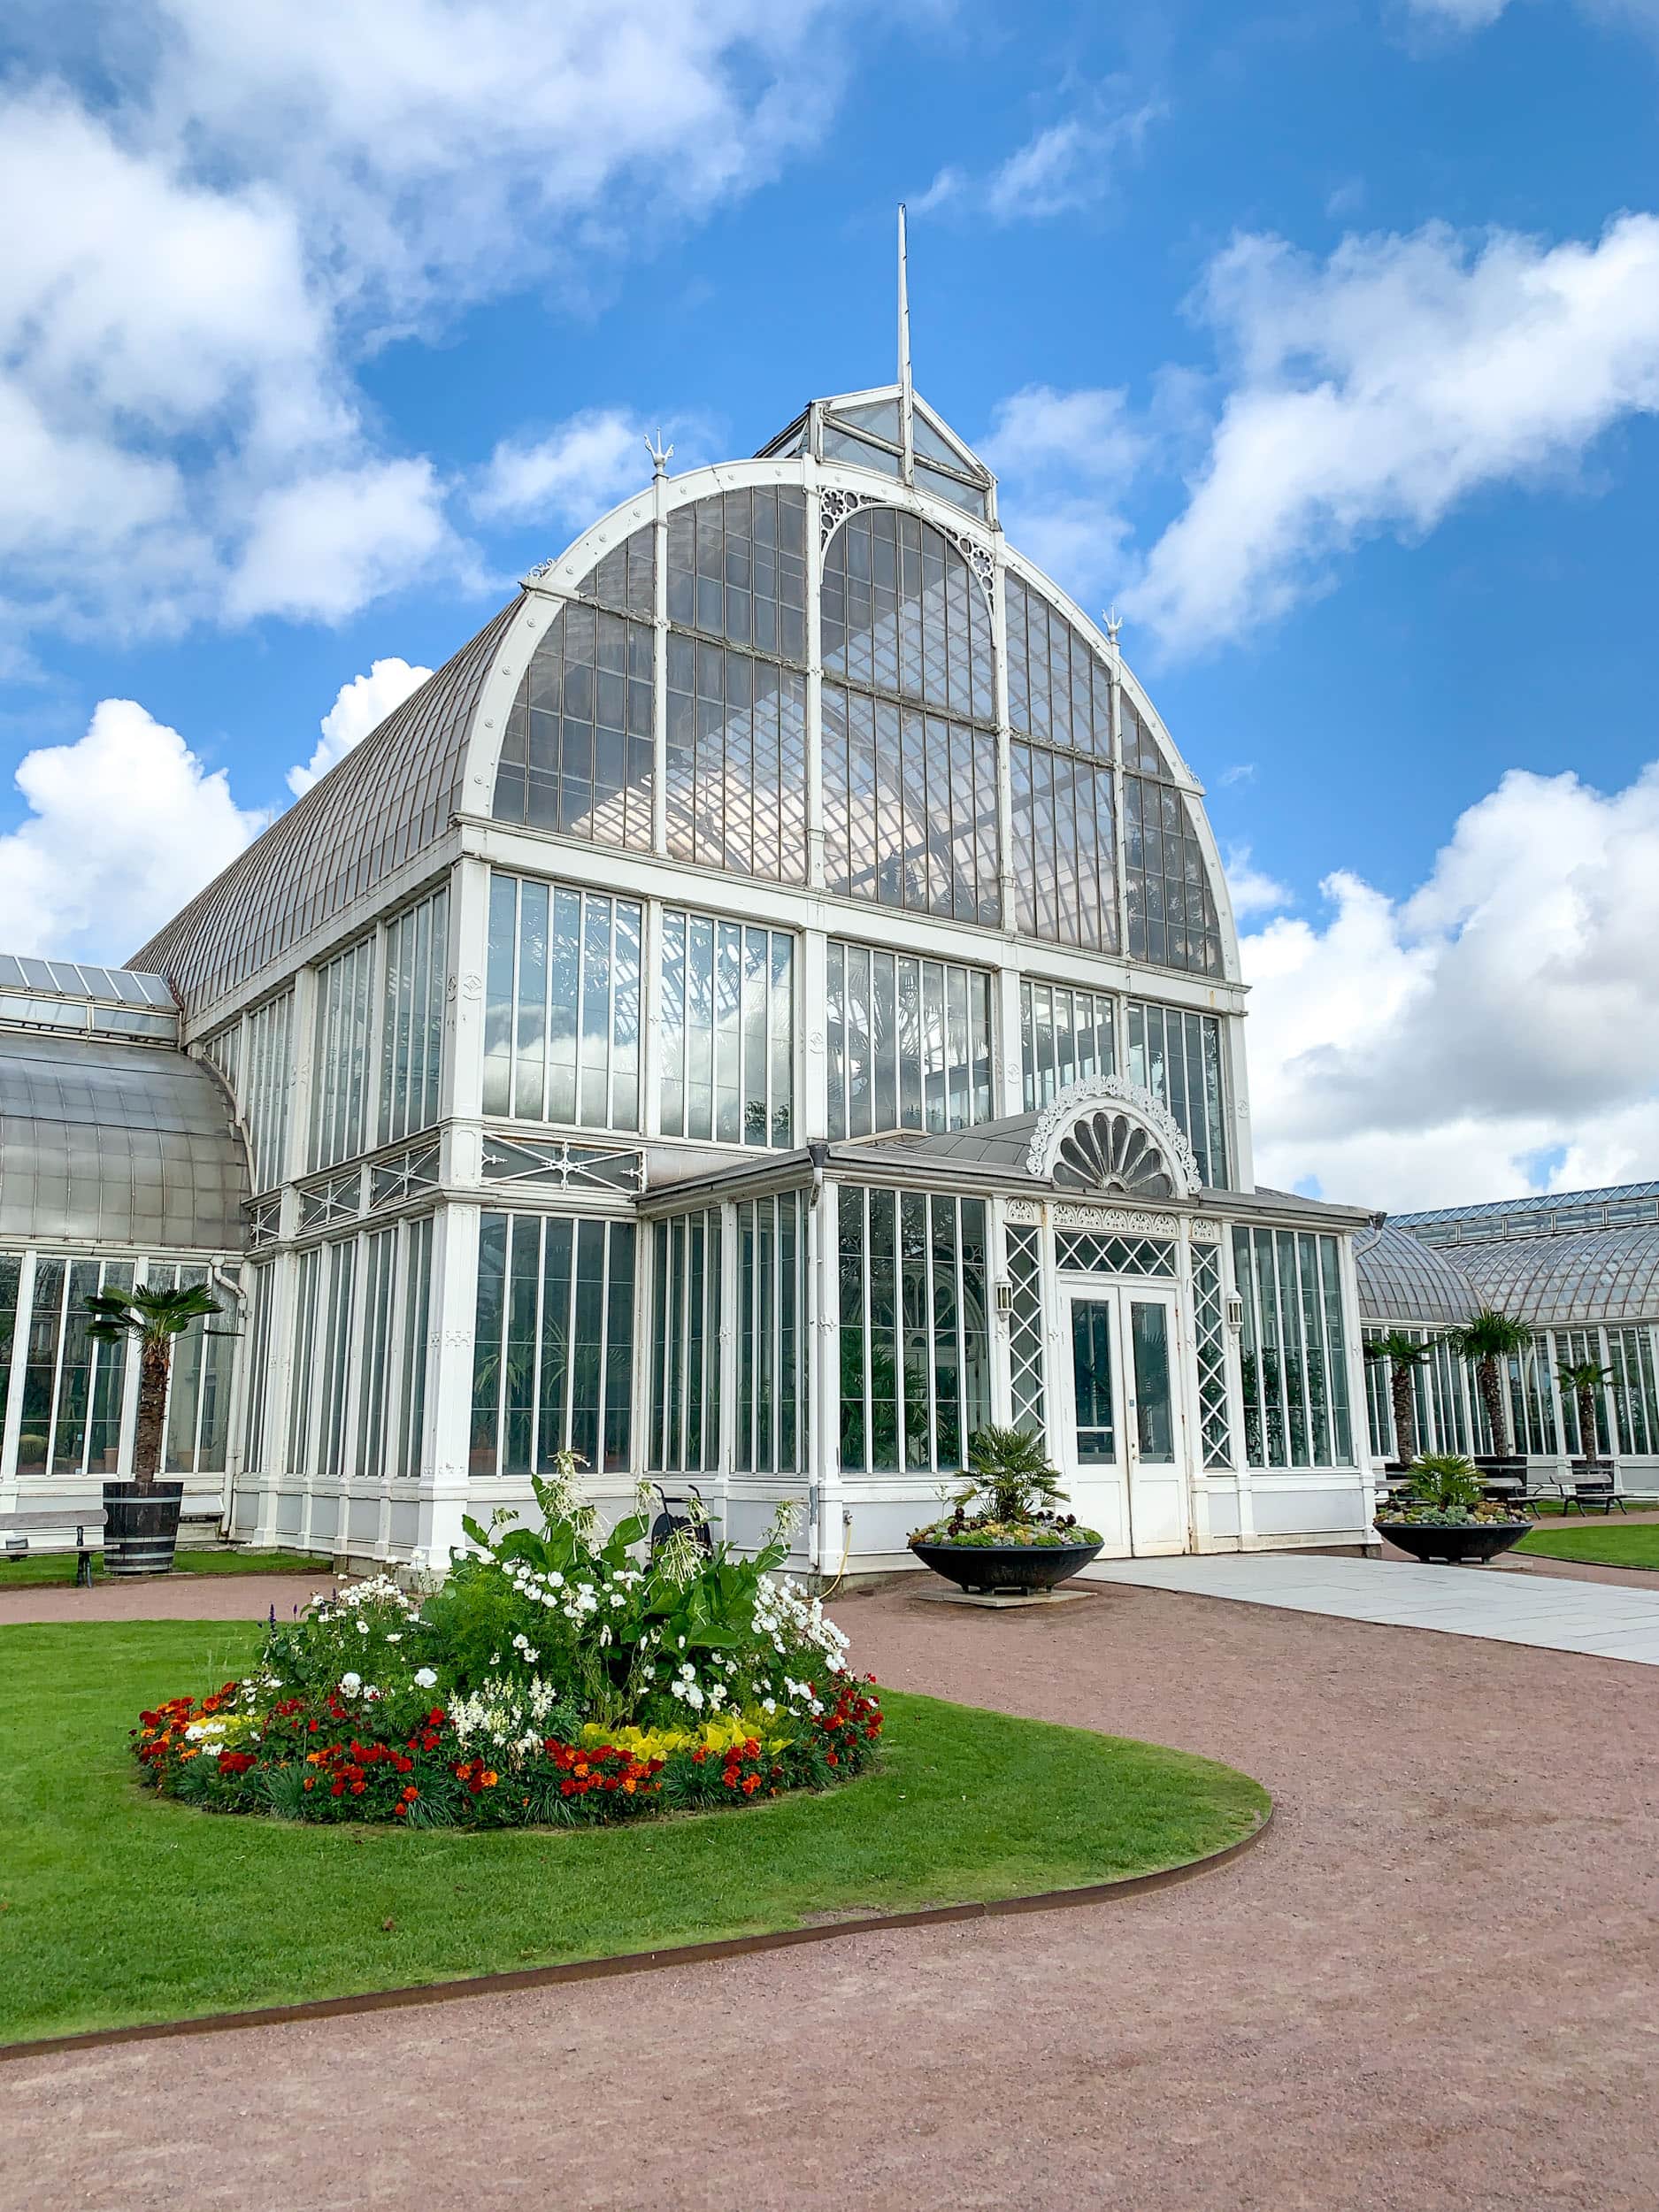 The Palm House (greenhouse) is free to enter